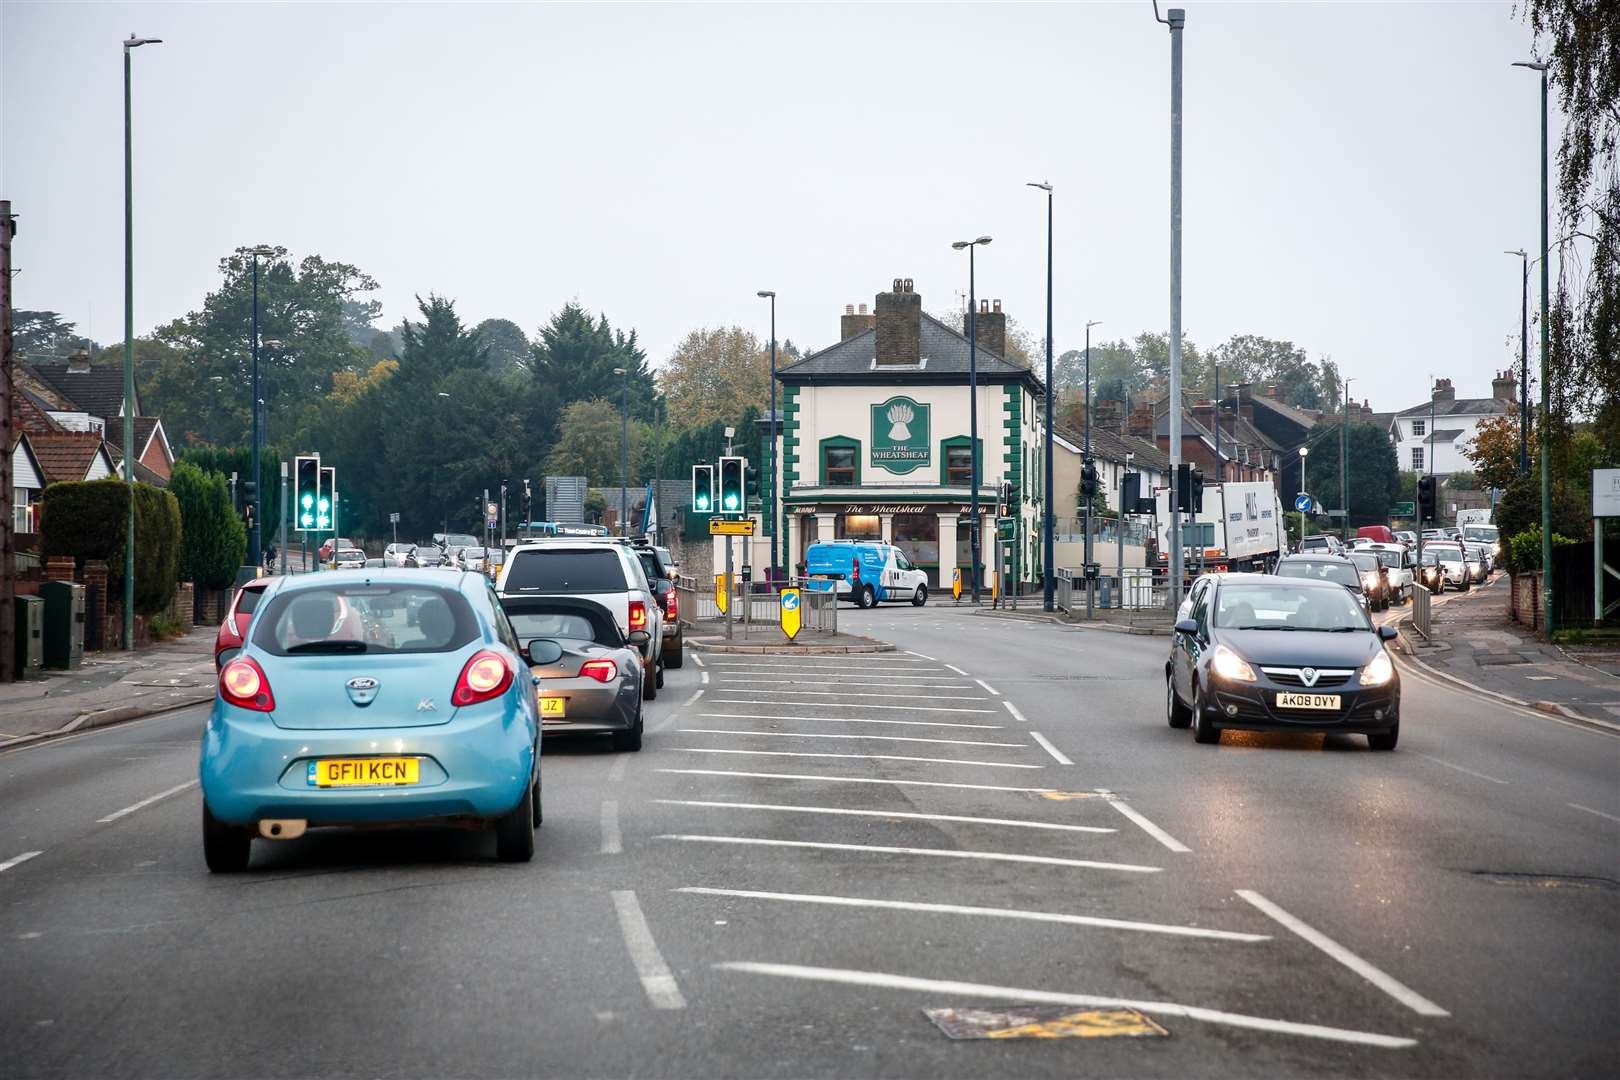 Most residents agree that traffic is still Maidstone's worst problem